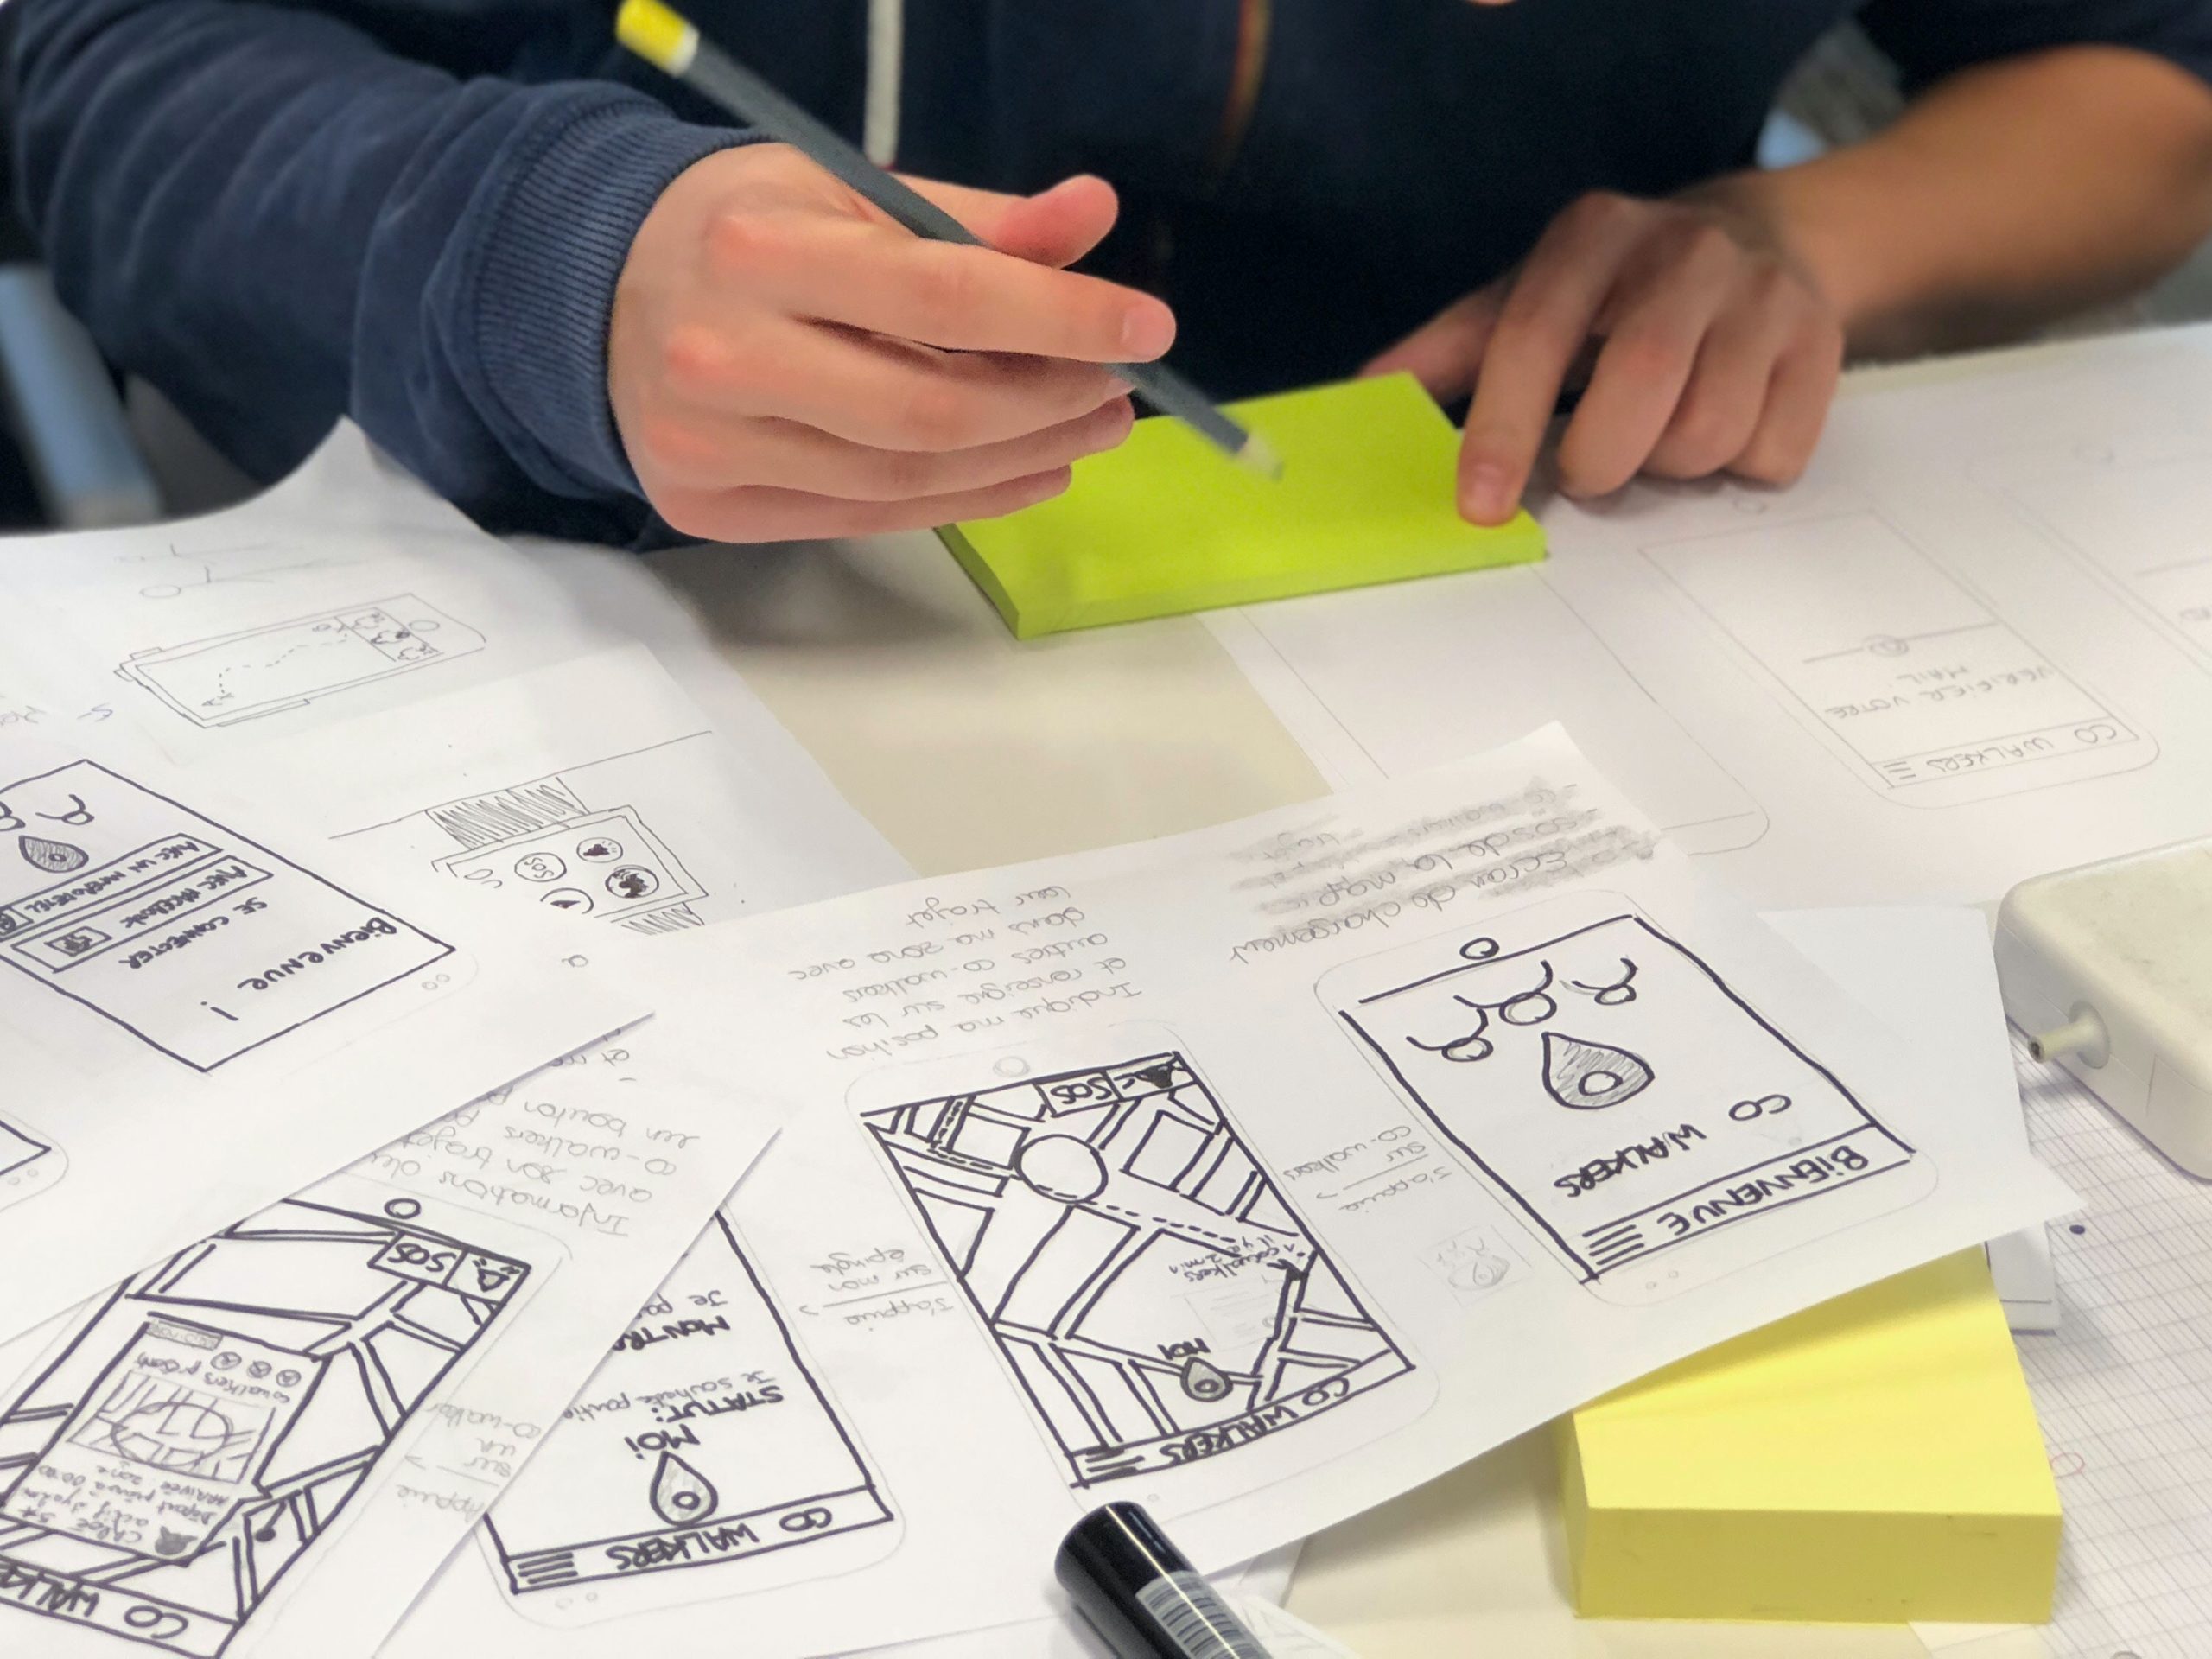 What is prototyping and what use it to test your ideas